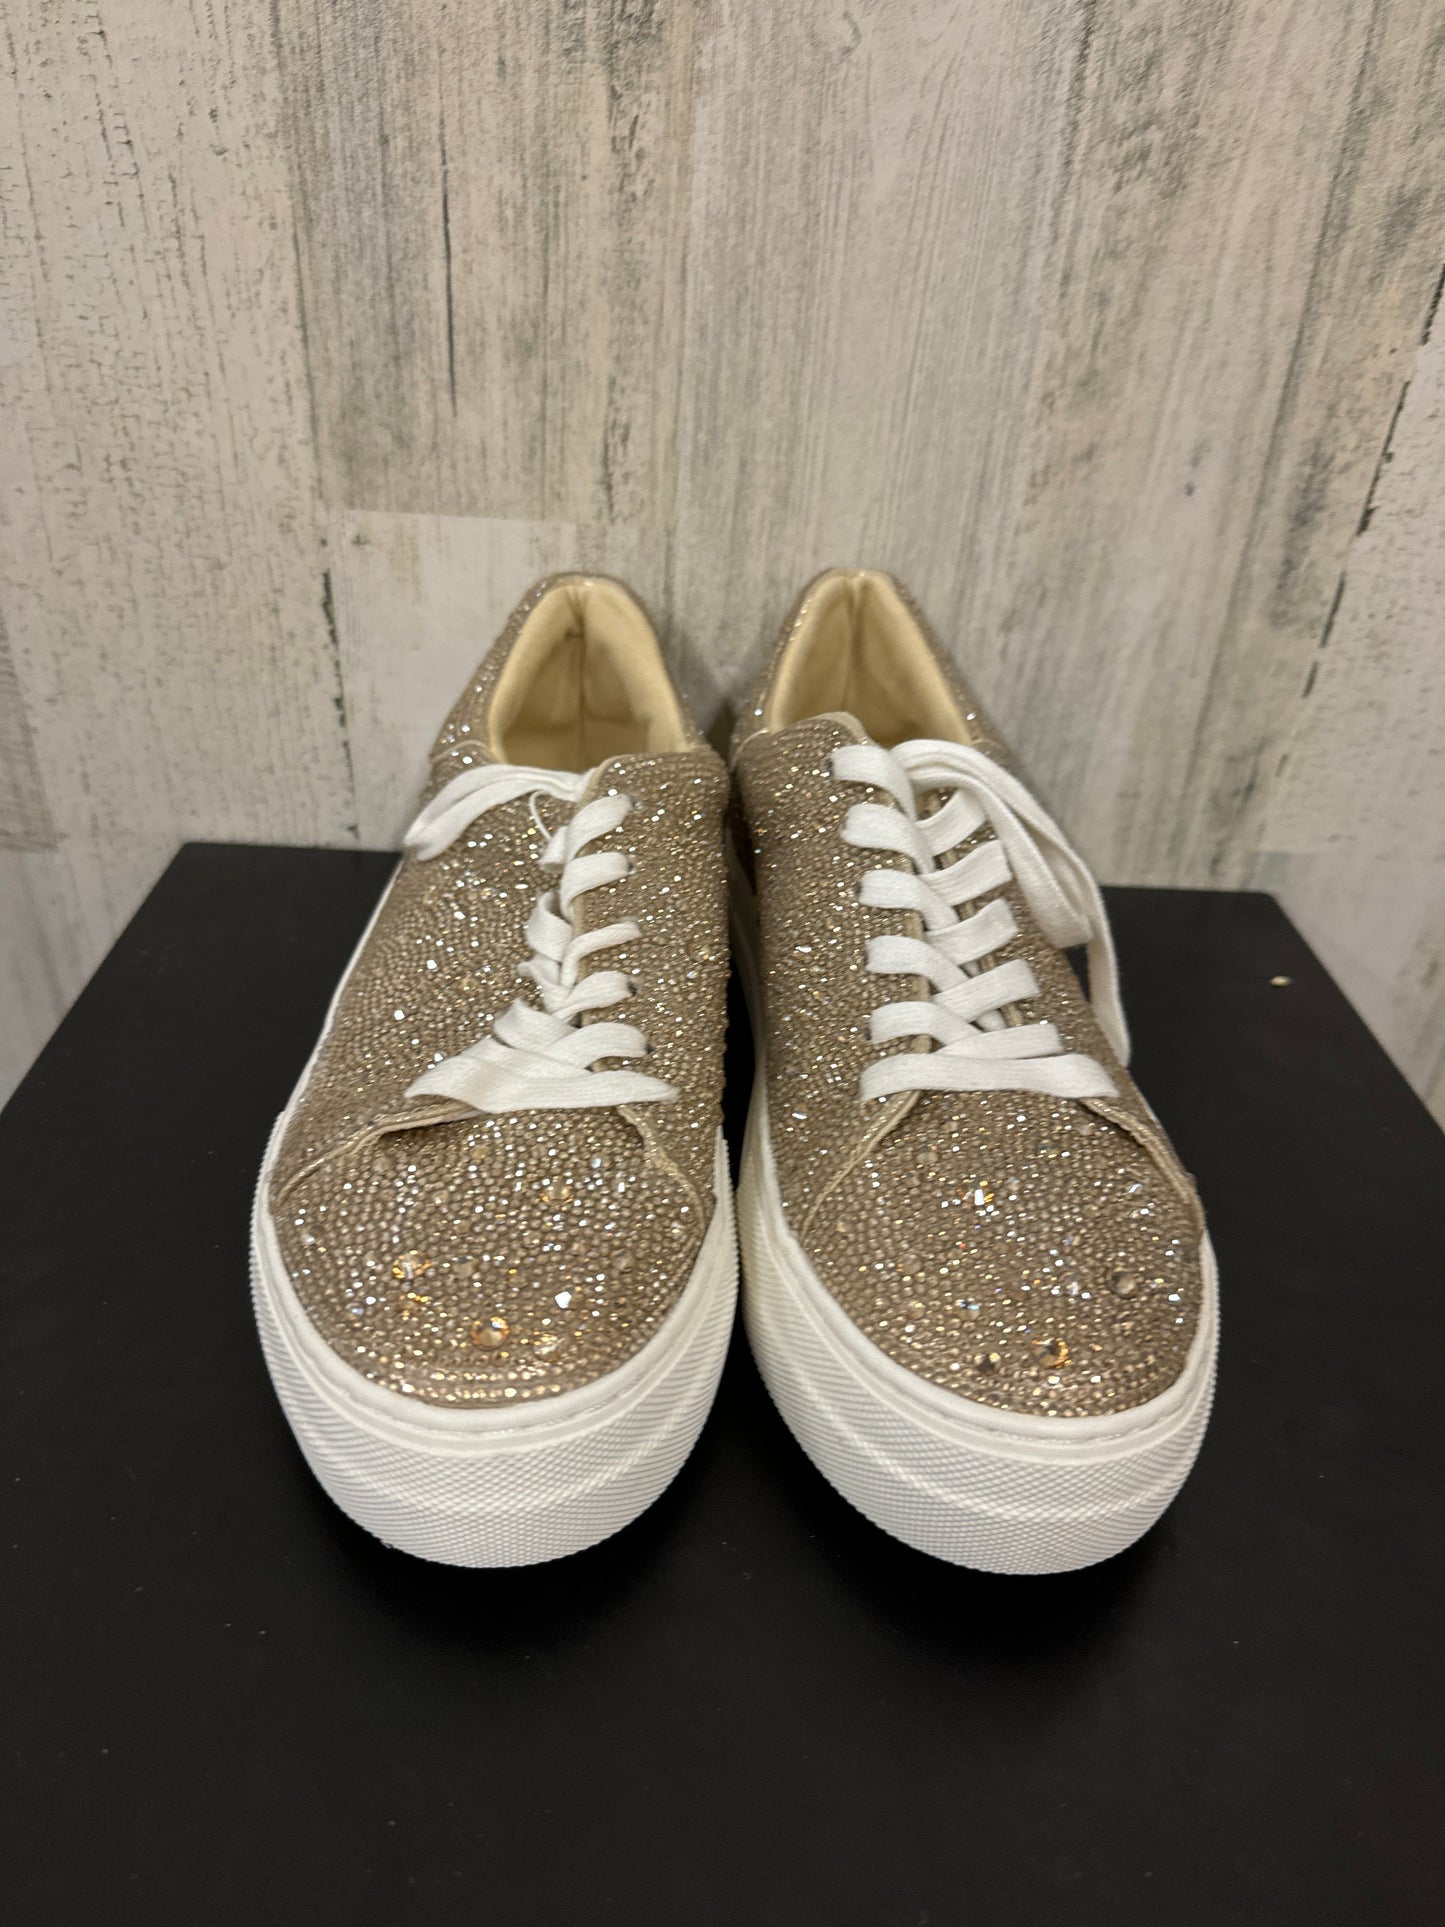 Gold Shoes Sneakers Betsey Johnson, Size 9.5